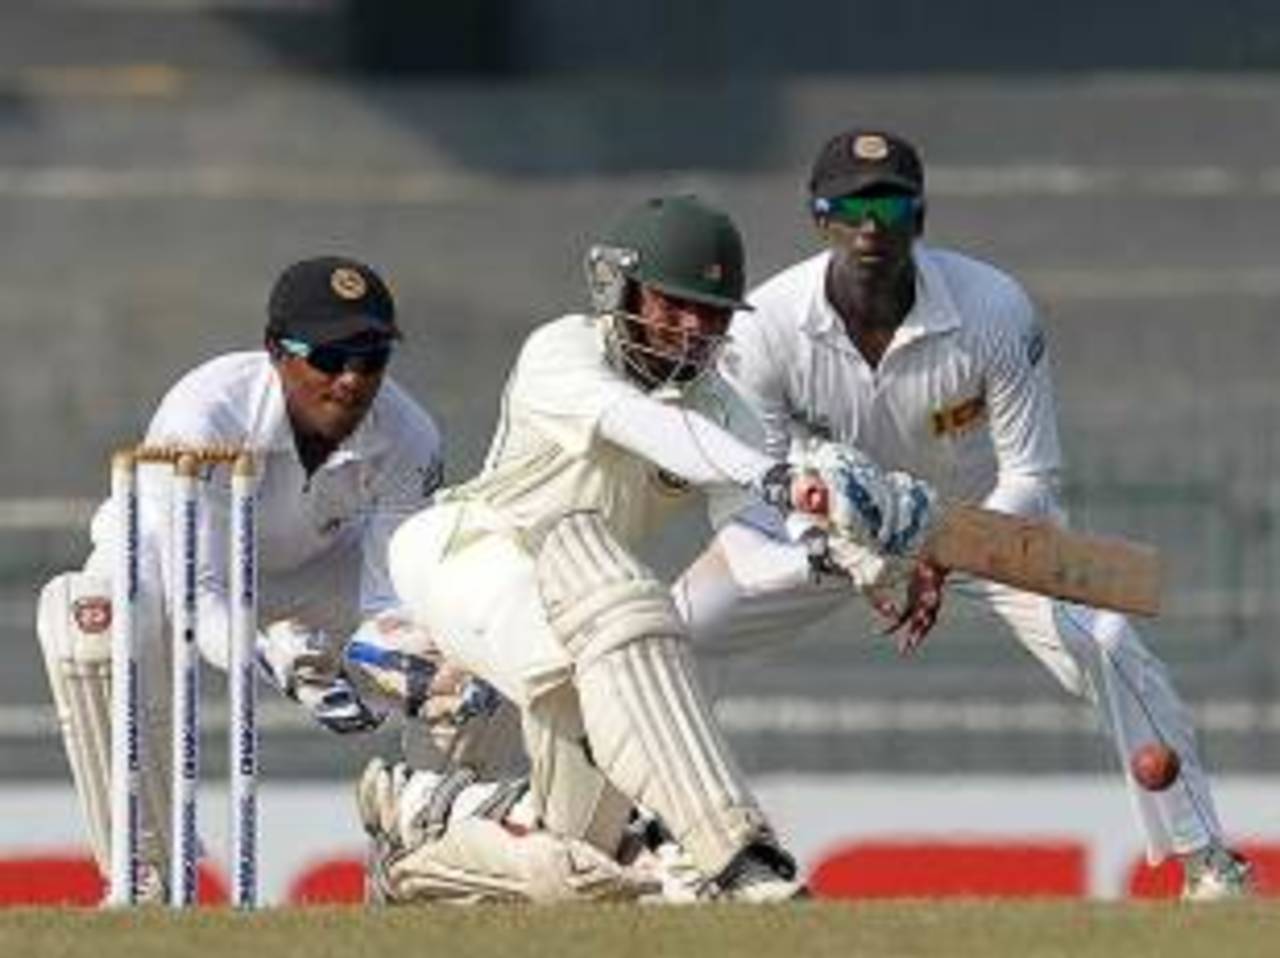 Mominul Haque made 37 before being given out caught at short leg&nbsp;&nbsp;&bull;&nbsp;&nbsp;AFP